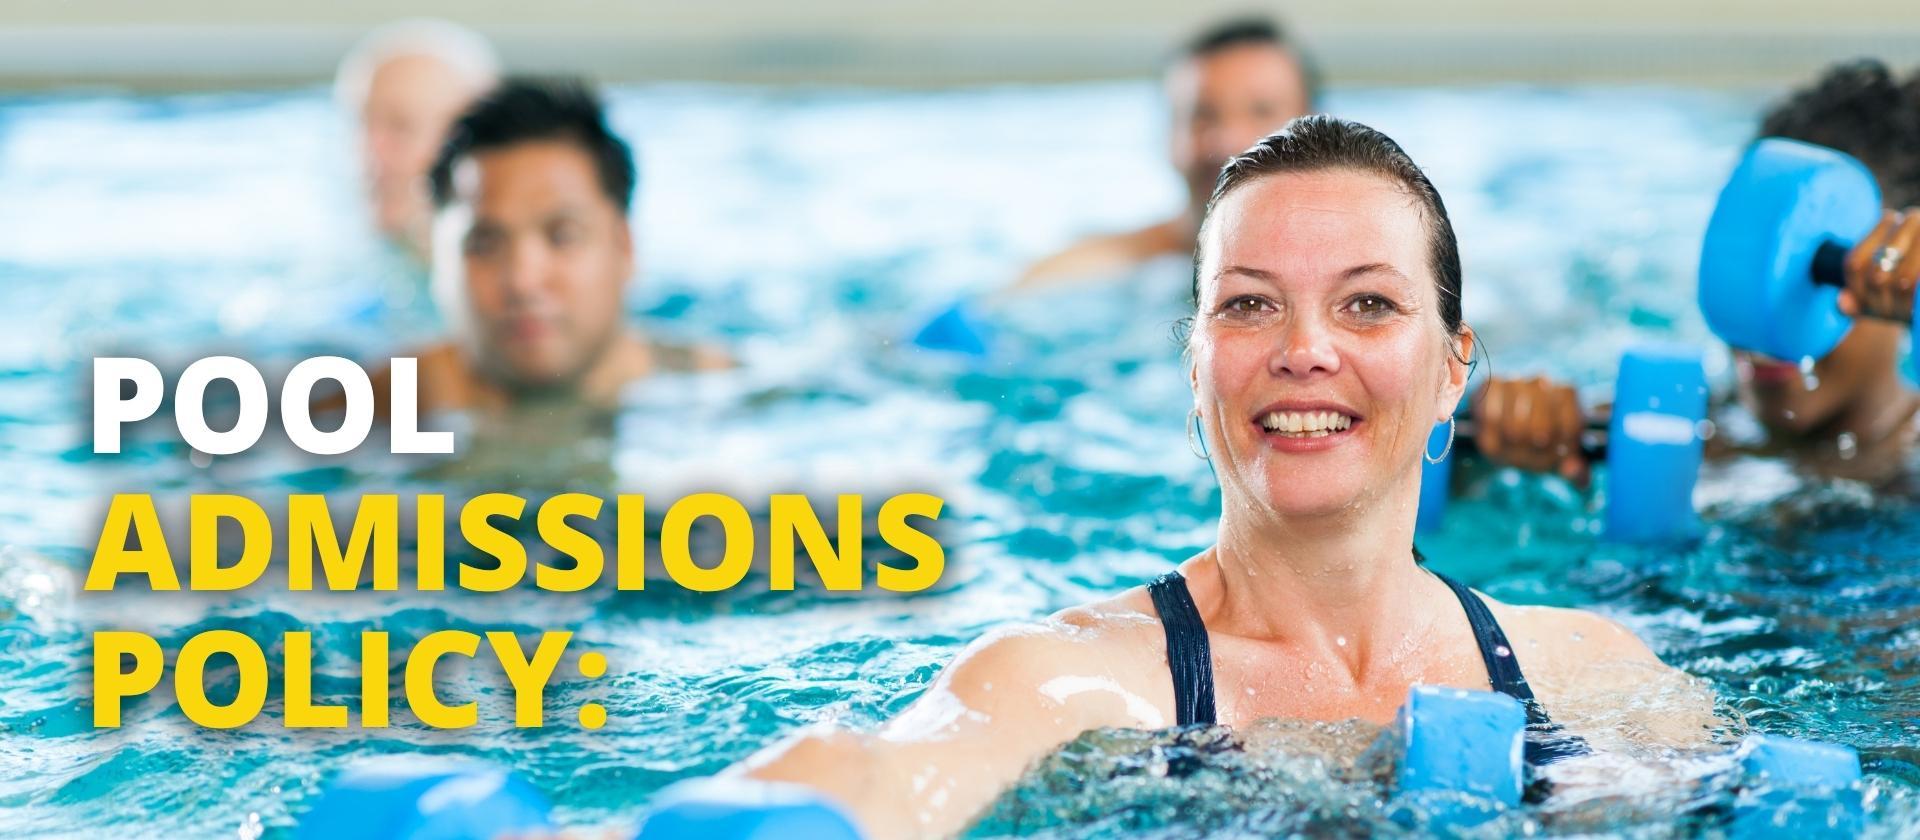 Atherstone leisure complex, swimming pool admissions policy